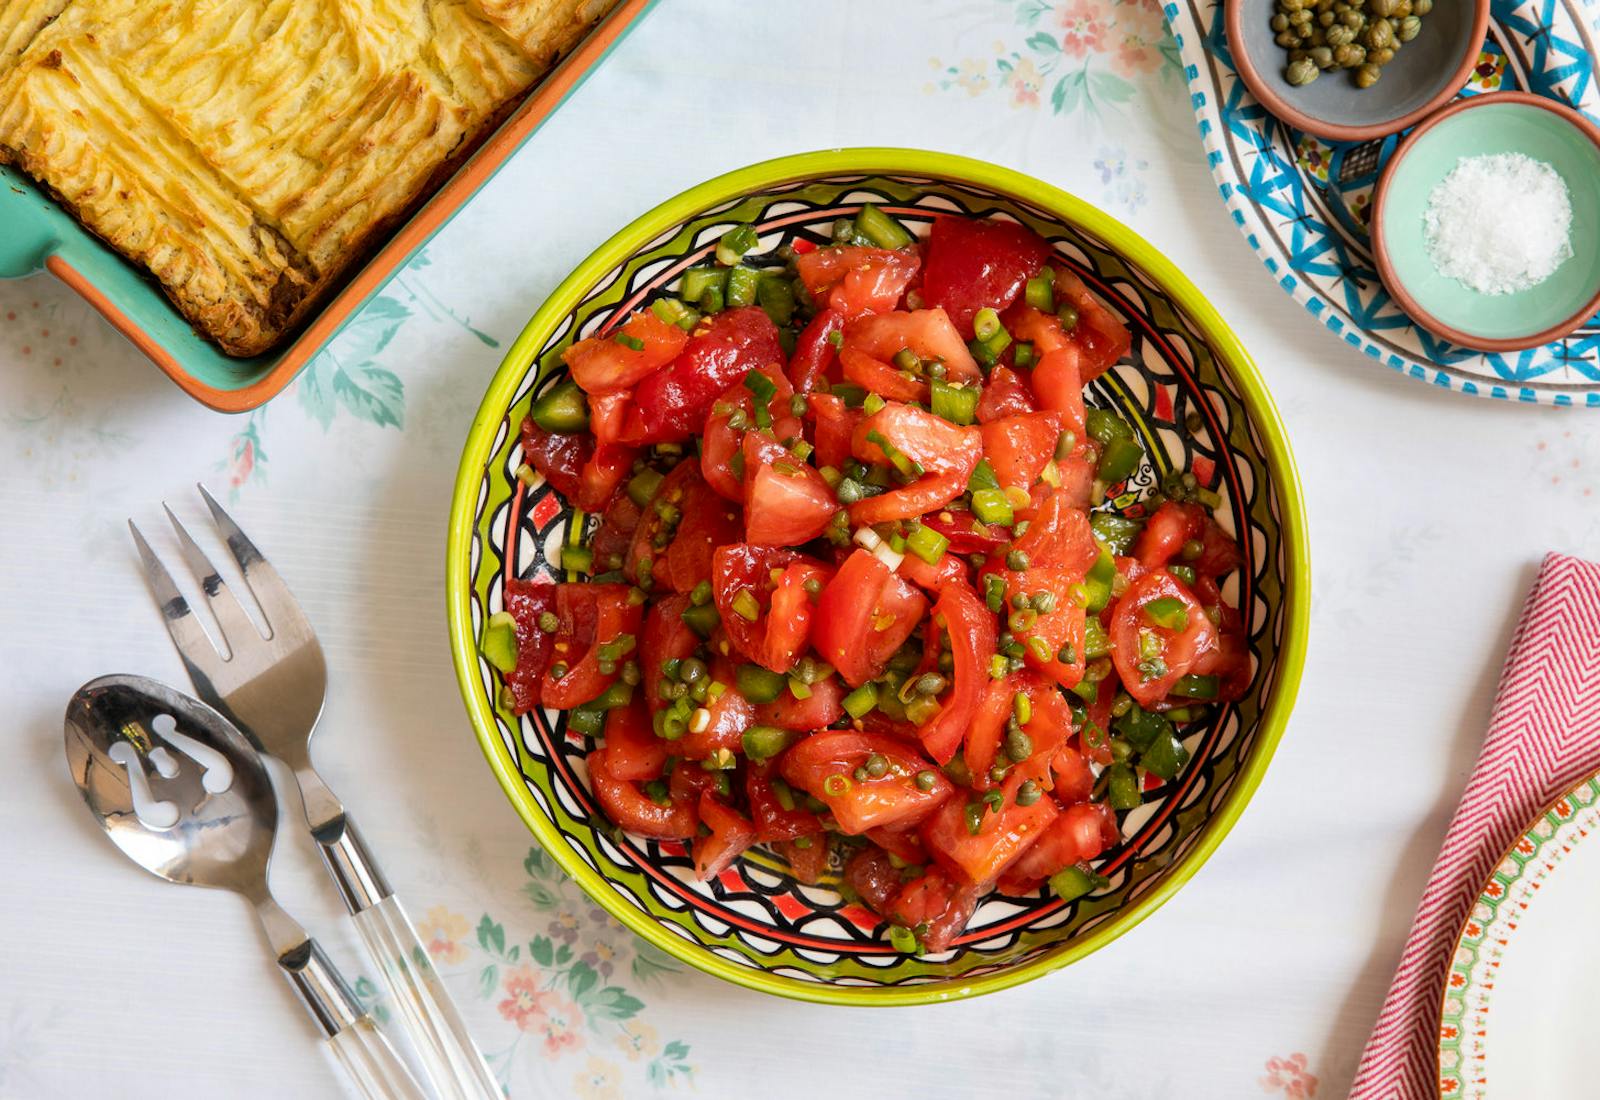 Tomato salad with capers in green and red patterned bowl alongside dishes with coarse salt and capers, atop white floral tablecloth.